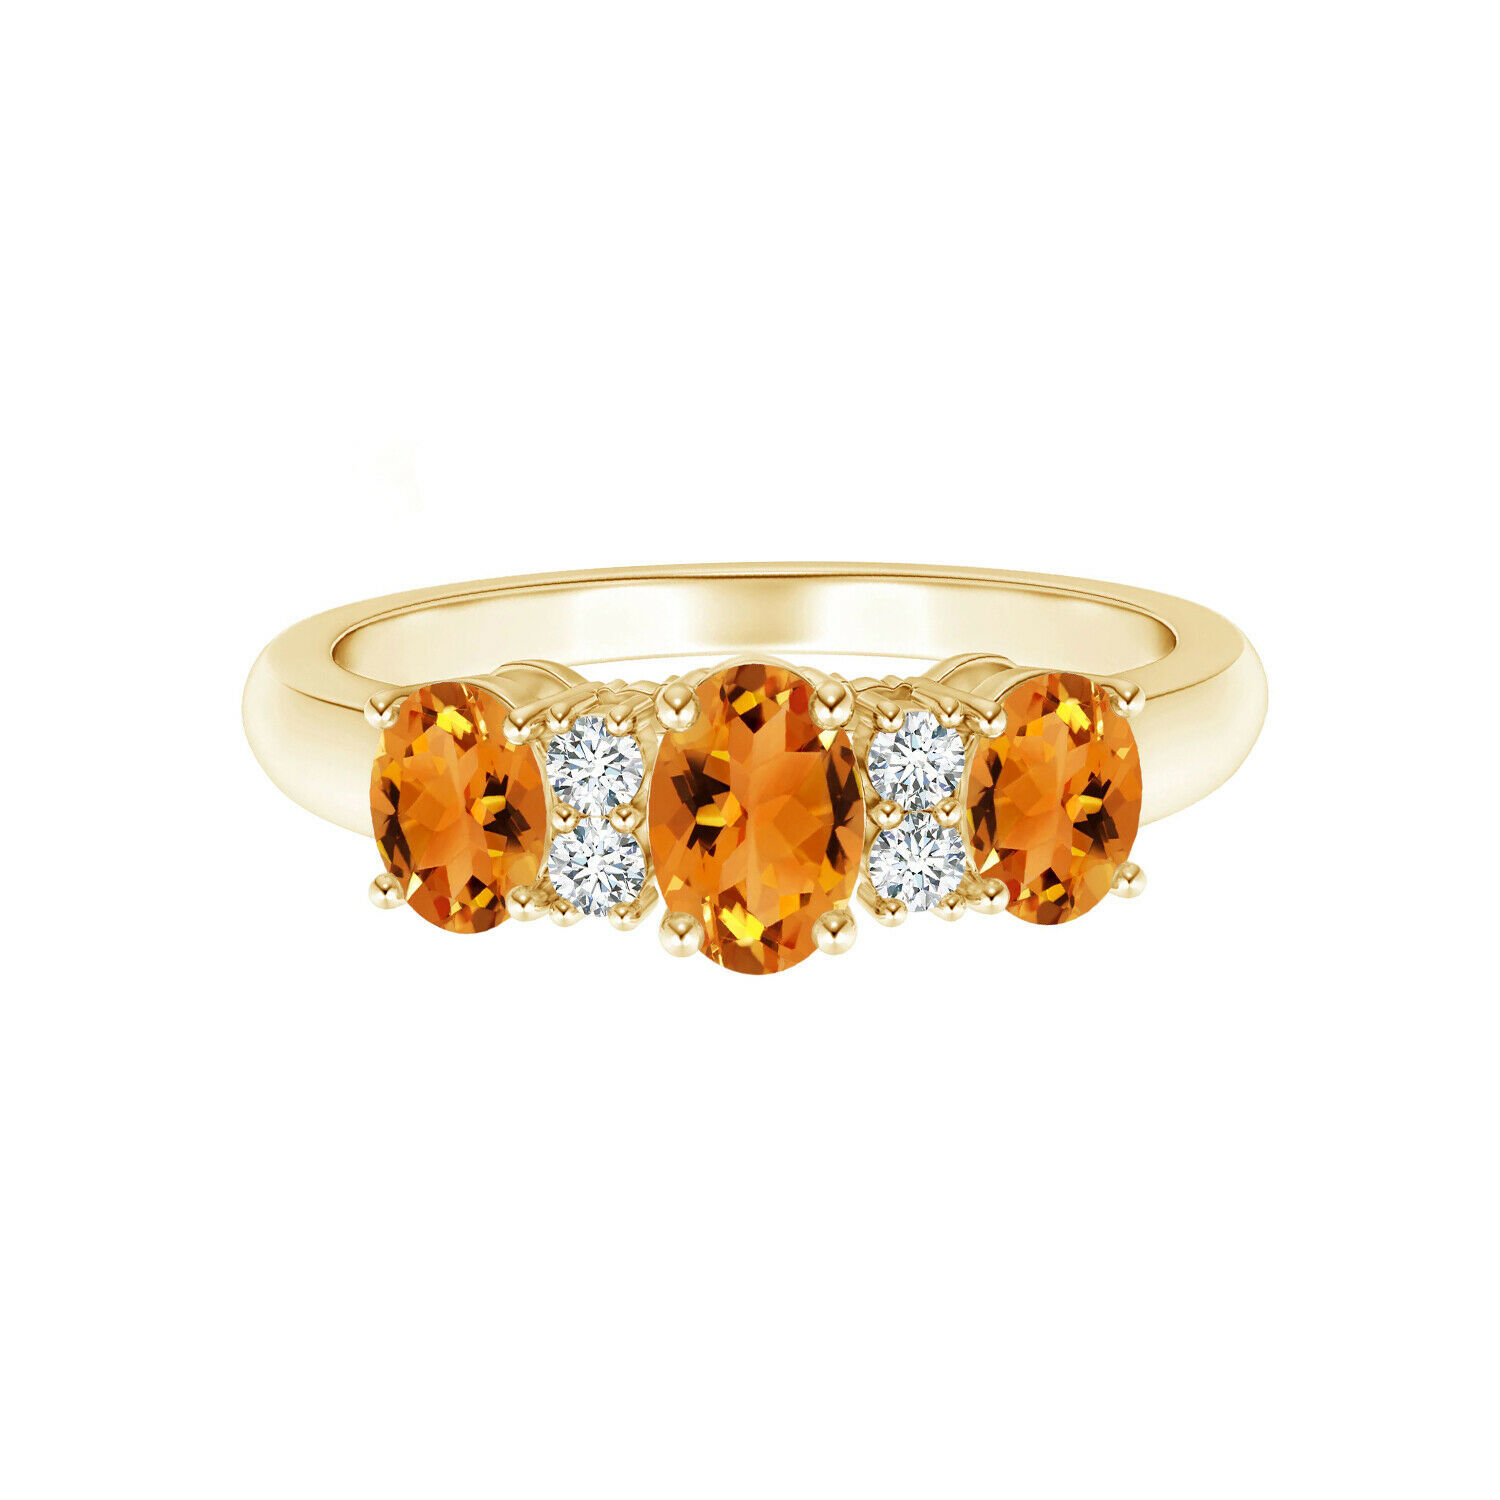 1.0 Cts Three Stone Oval Citrine 9K Yellow Gold 7X5 MM Engagement Ring